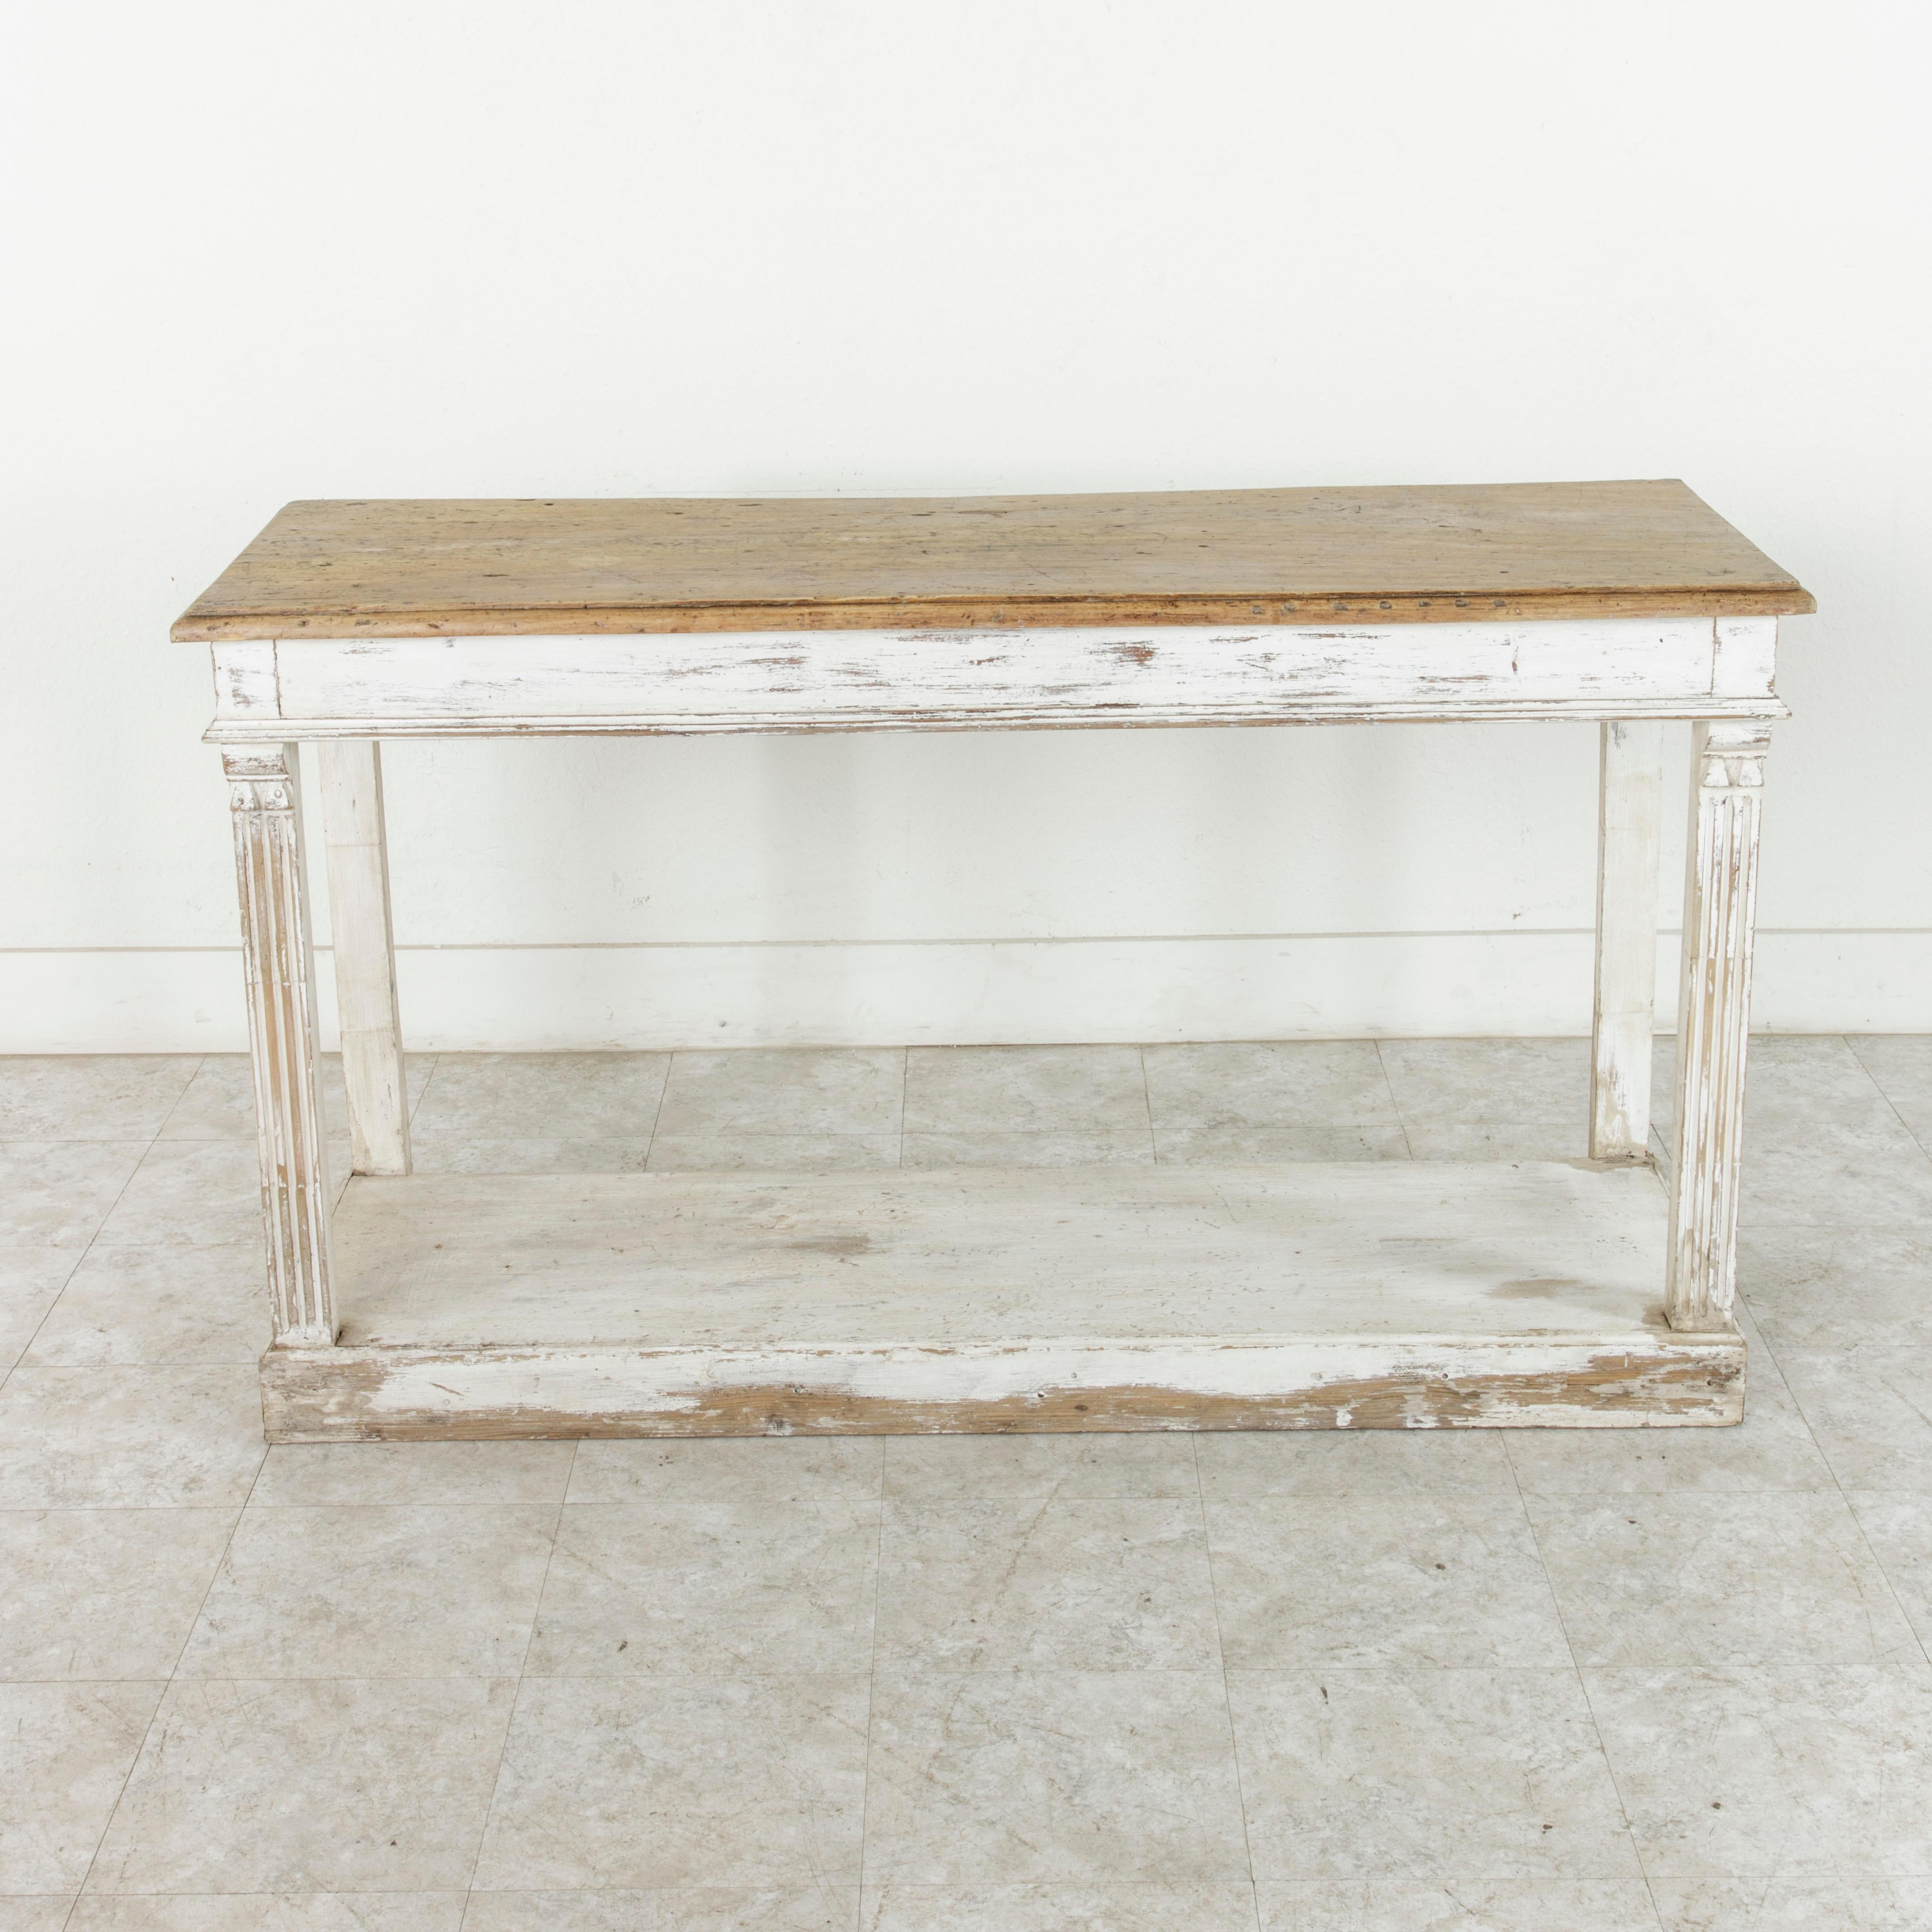 This French painted console table from the turn of the 20th century features a solid beveled walnut top made from a single plank of wood, naturally distressed from years of use. Supported by fluted columns at the front, the base is painted in white